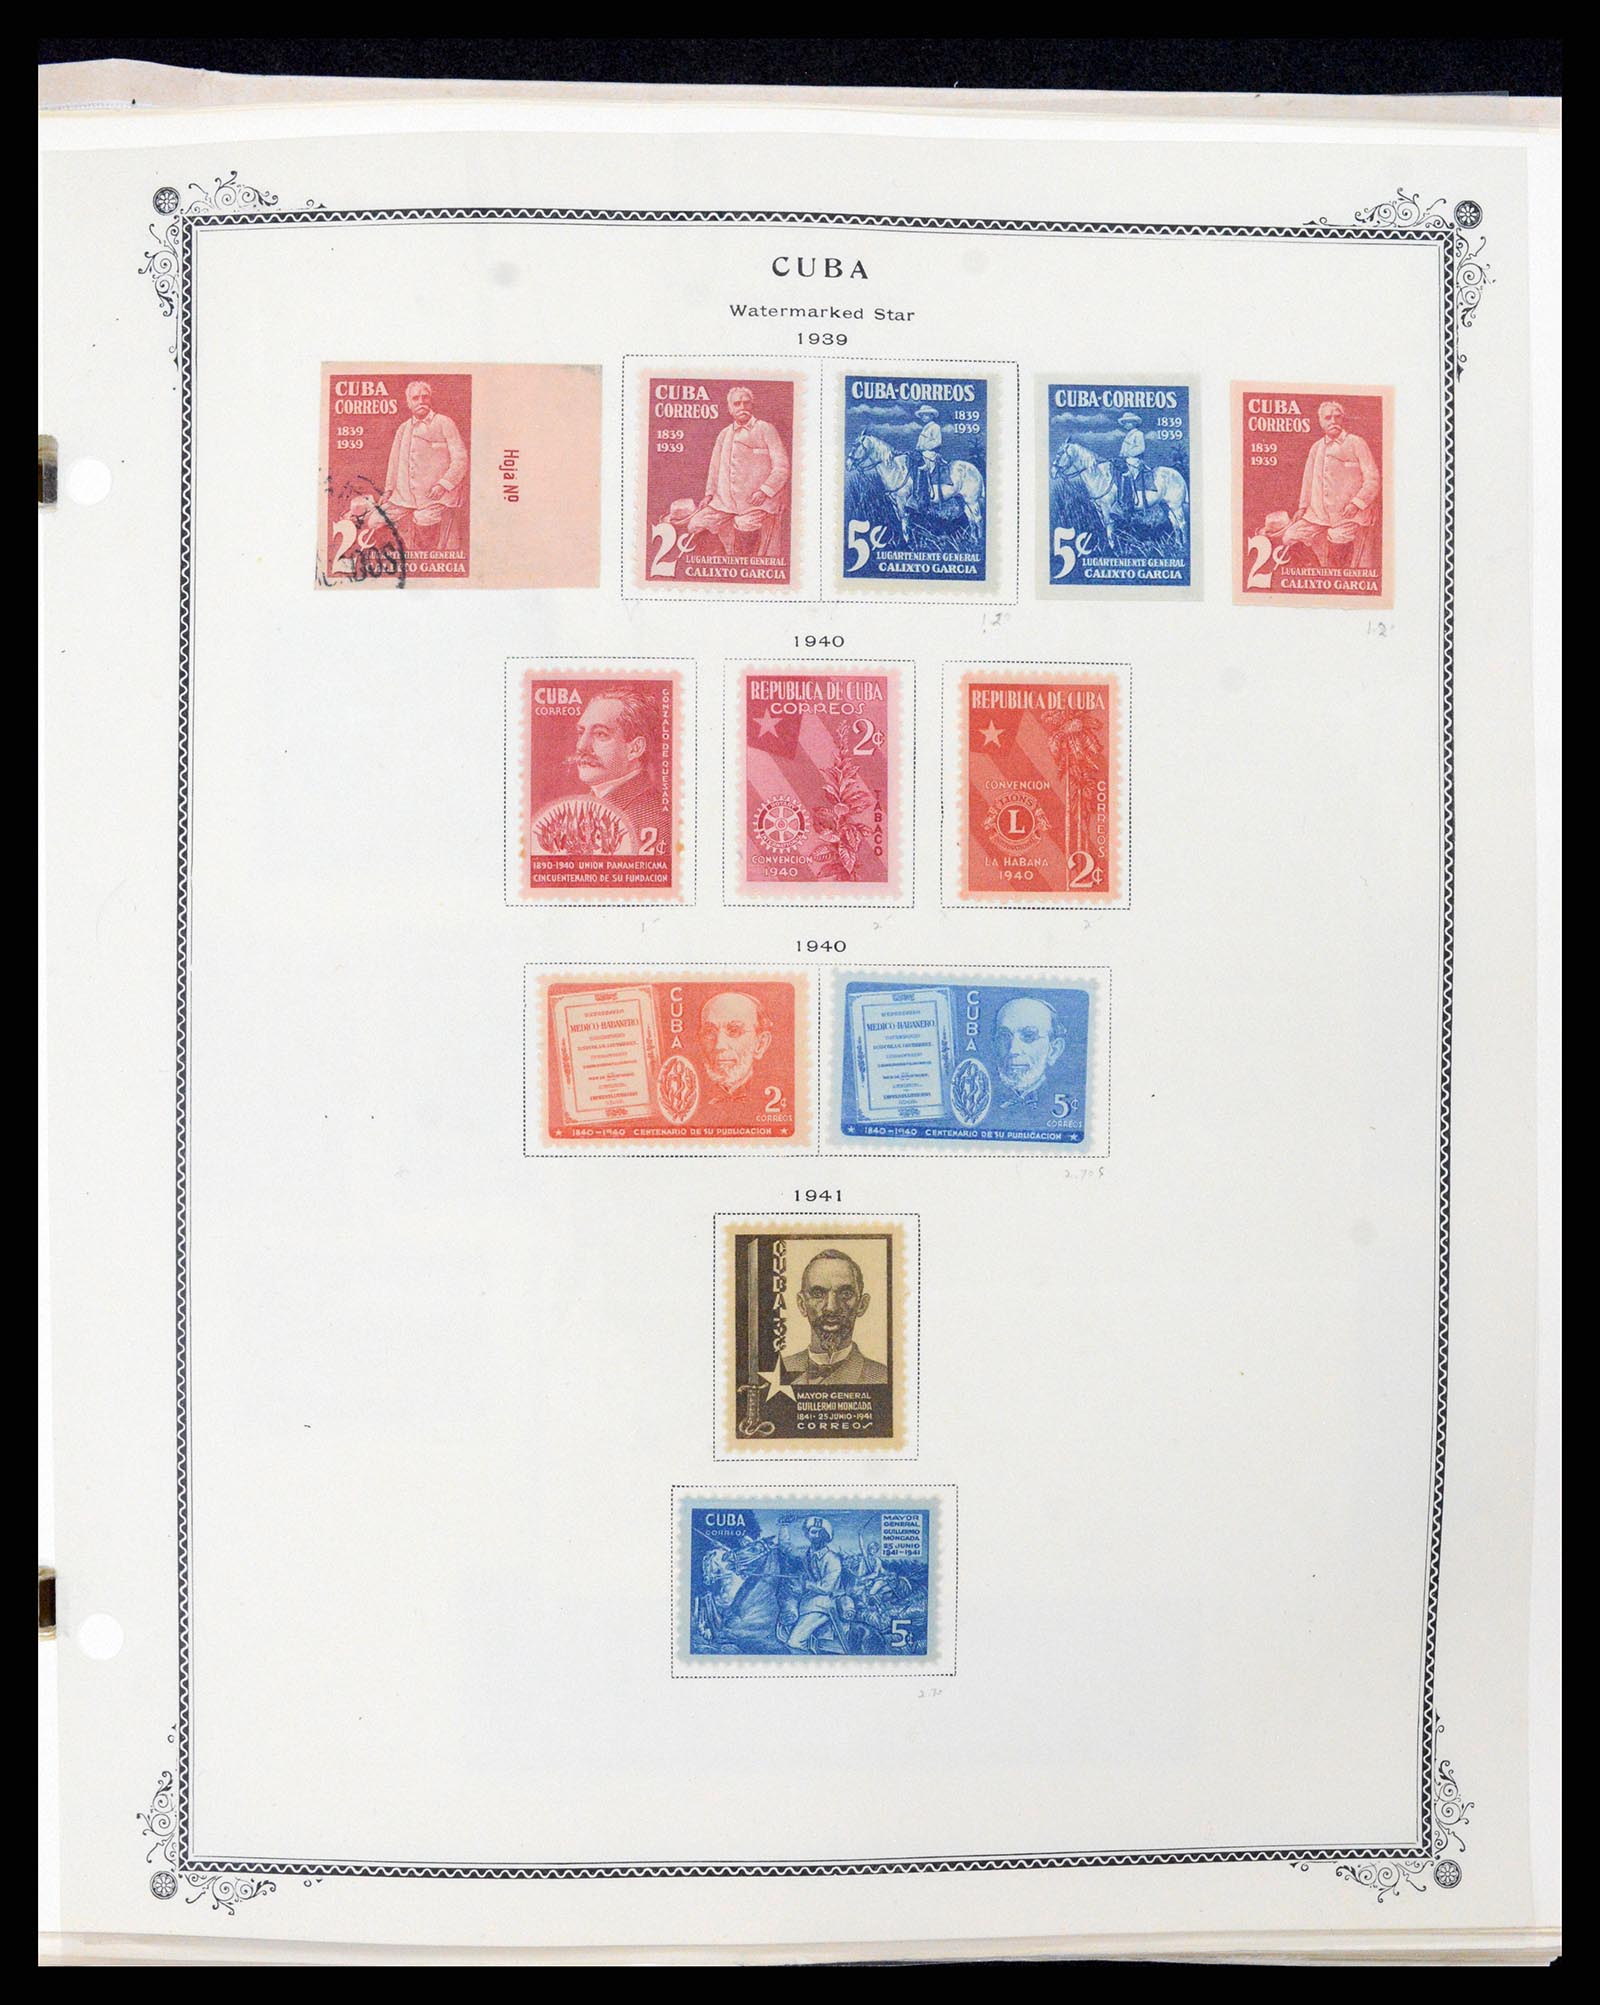 37228 030 - Stamp collection 37228 Cuba 1855-2009.